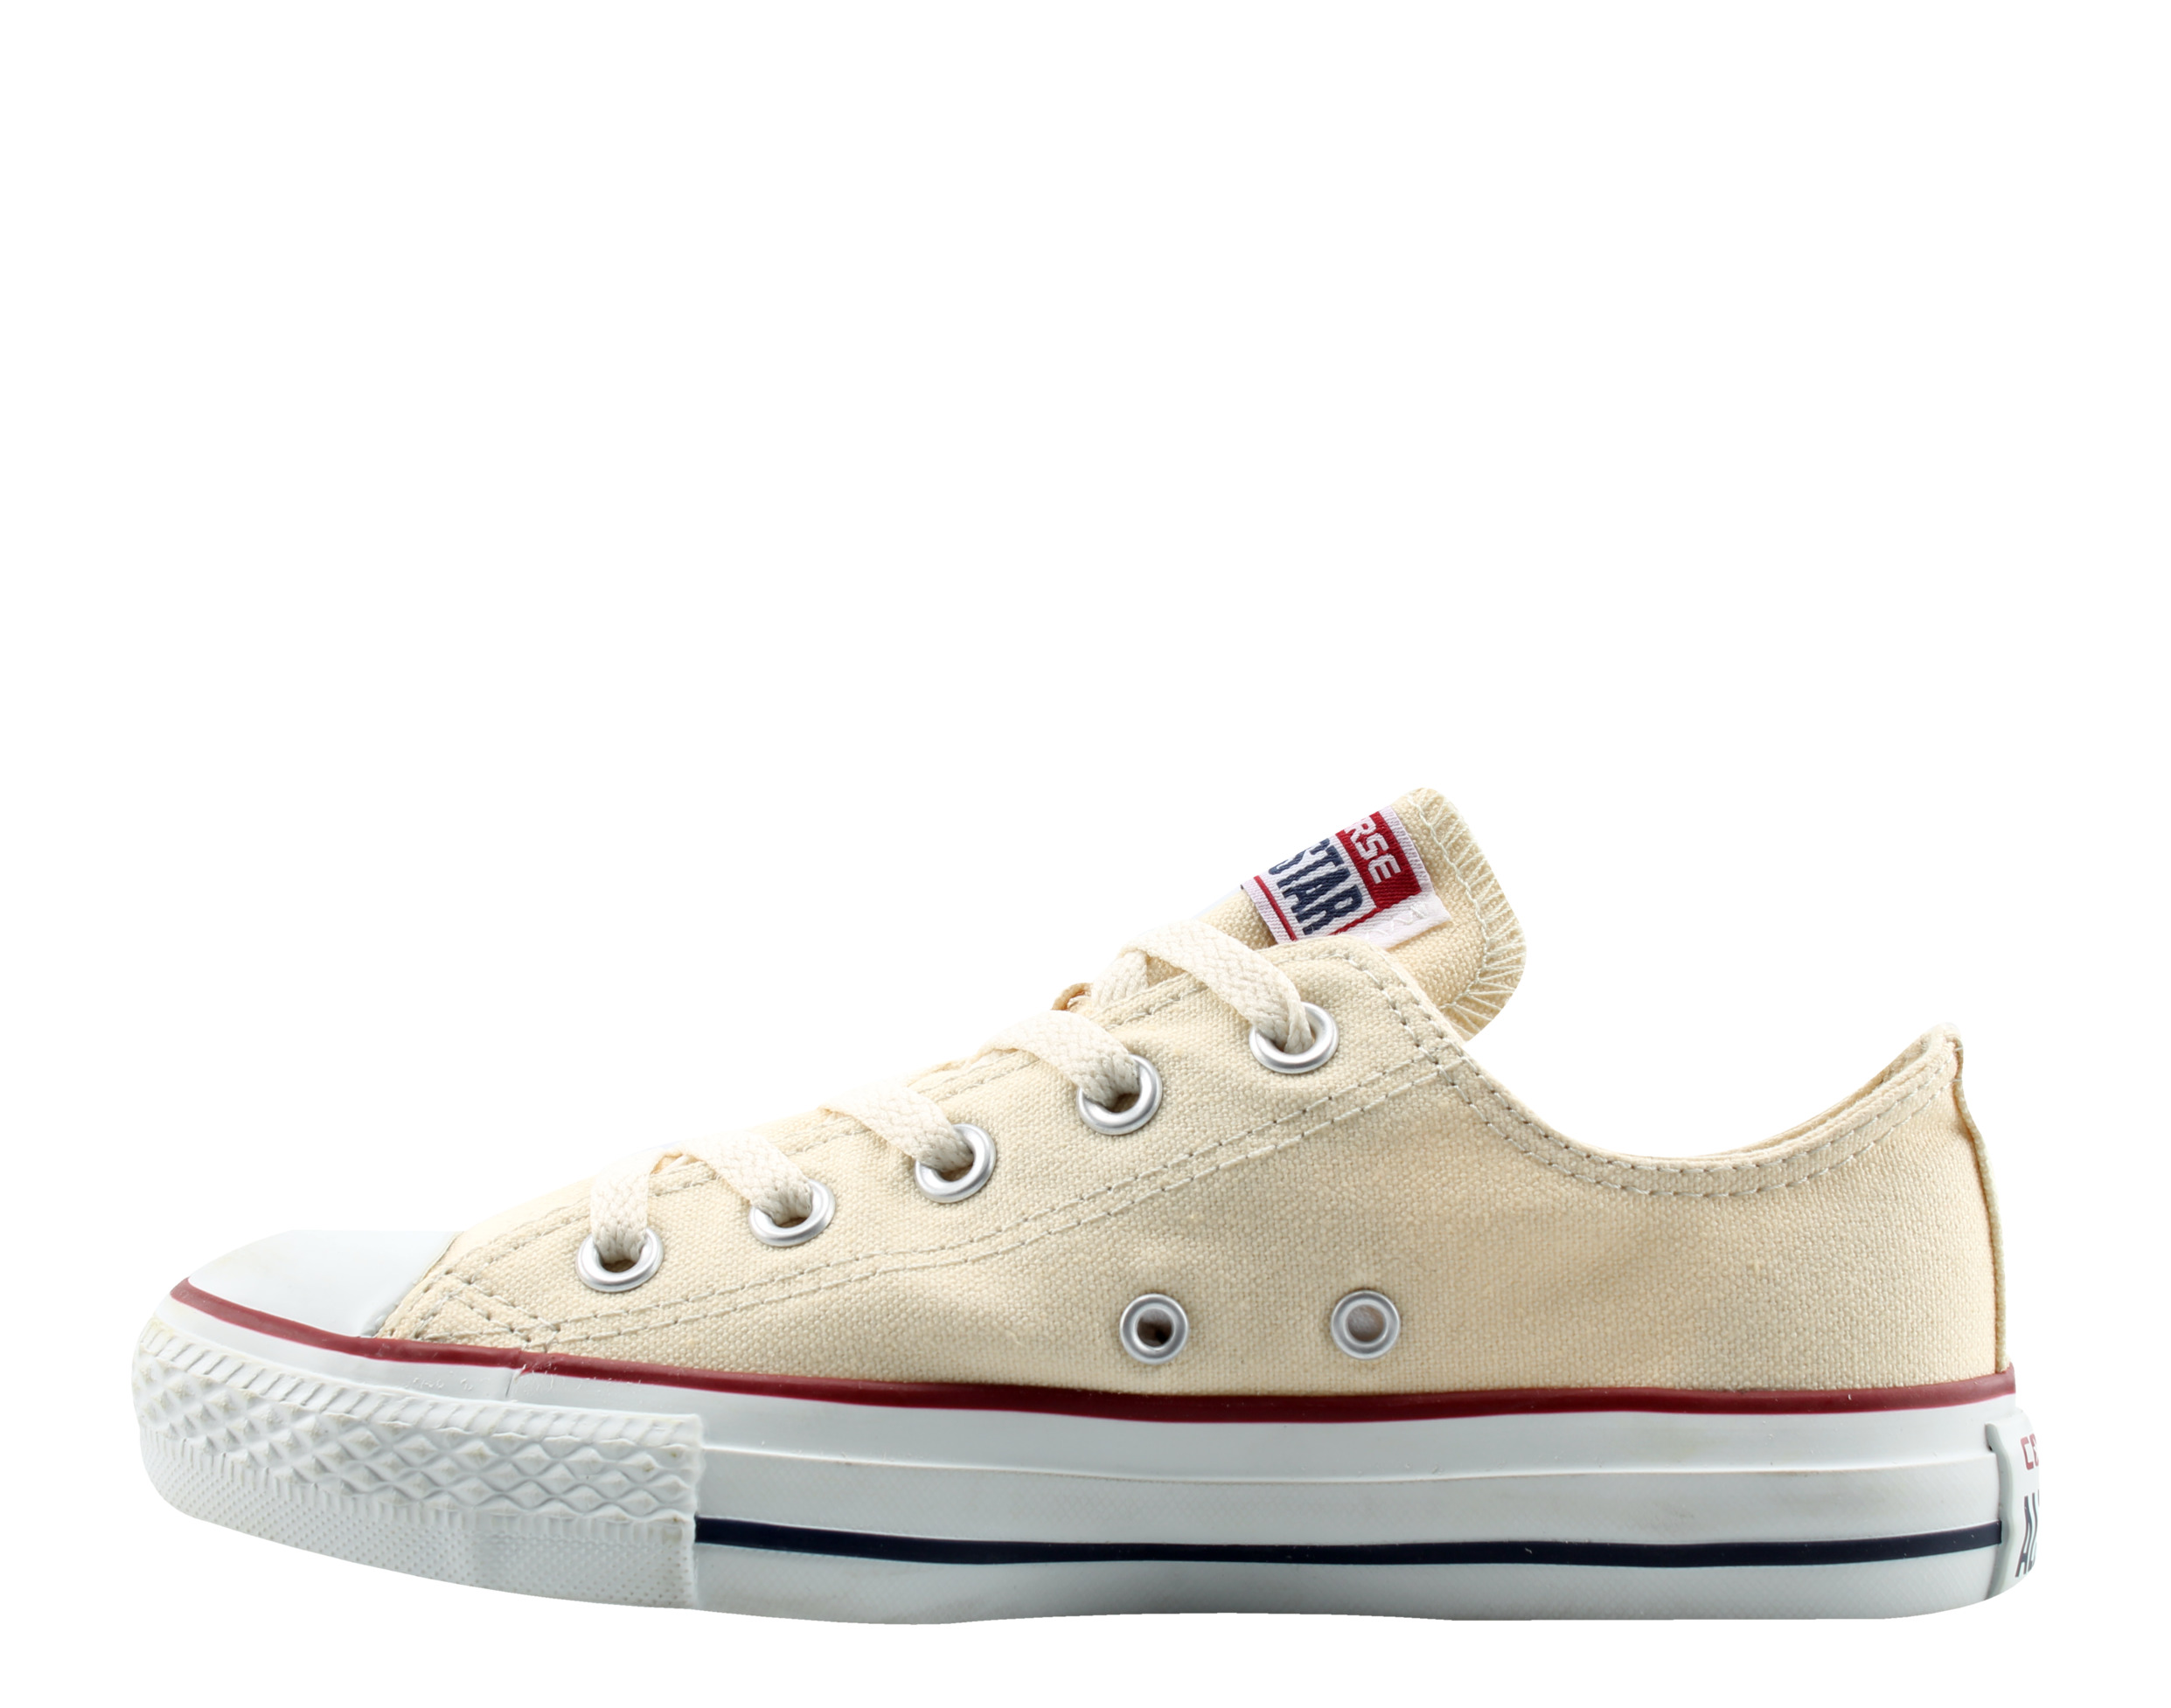 Converse Chuck Taylor OX All Star Big Kids Sneakers Unbleach White m9165 - image 3 of 6